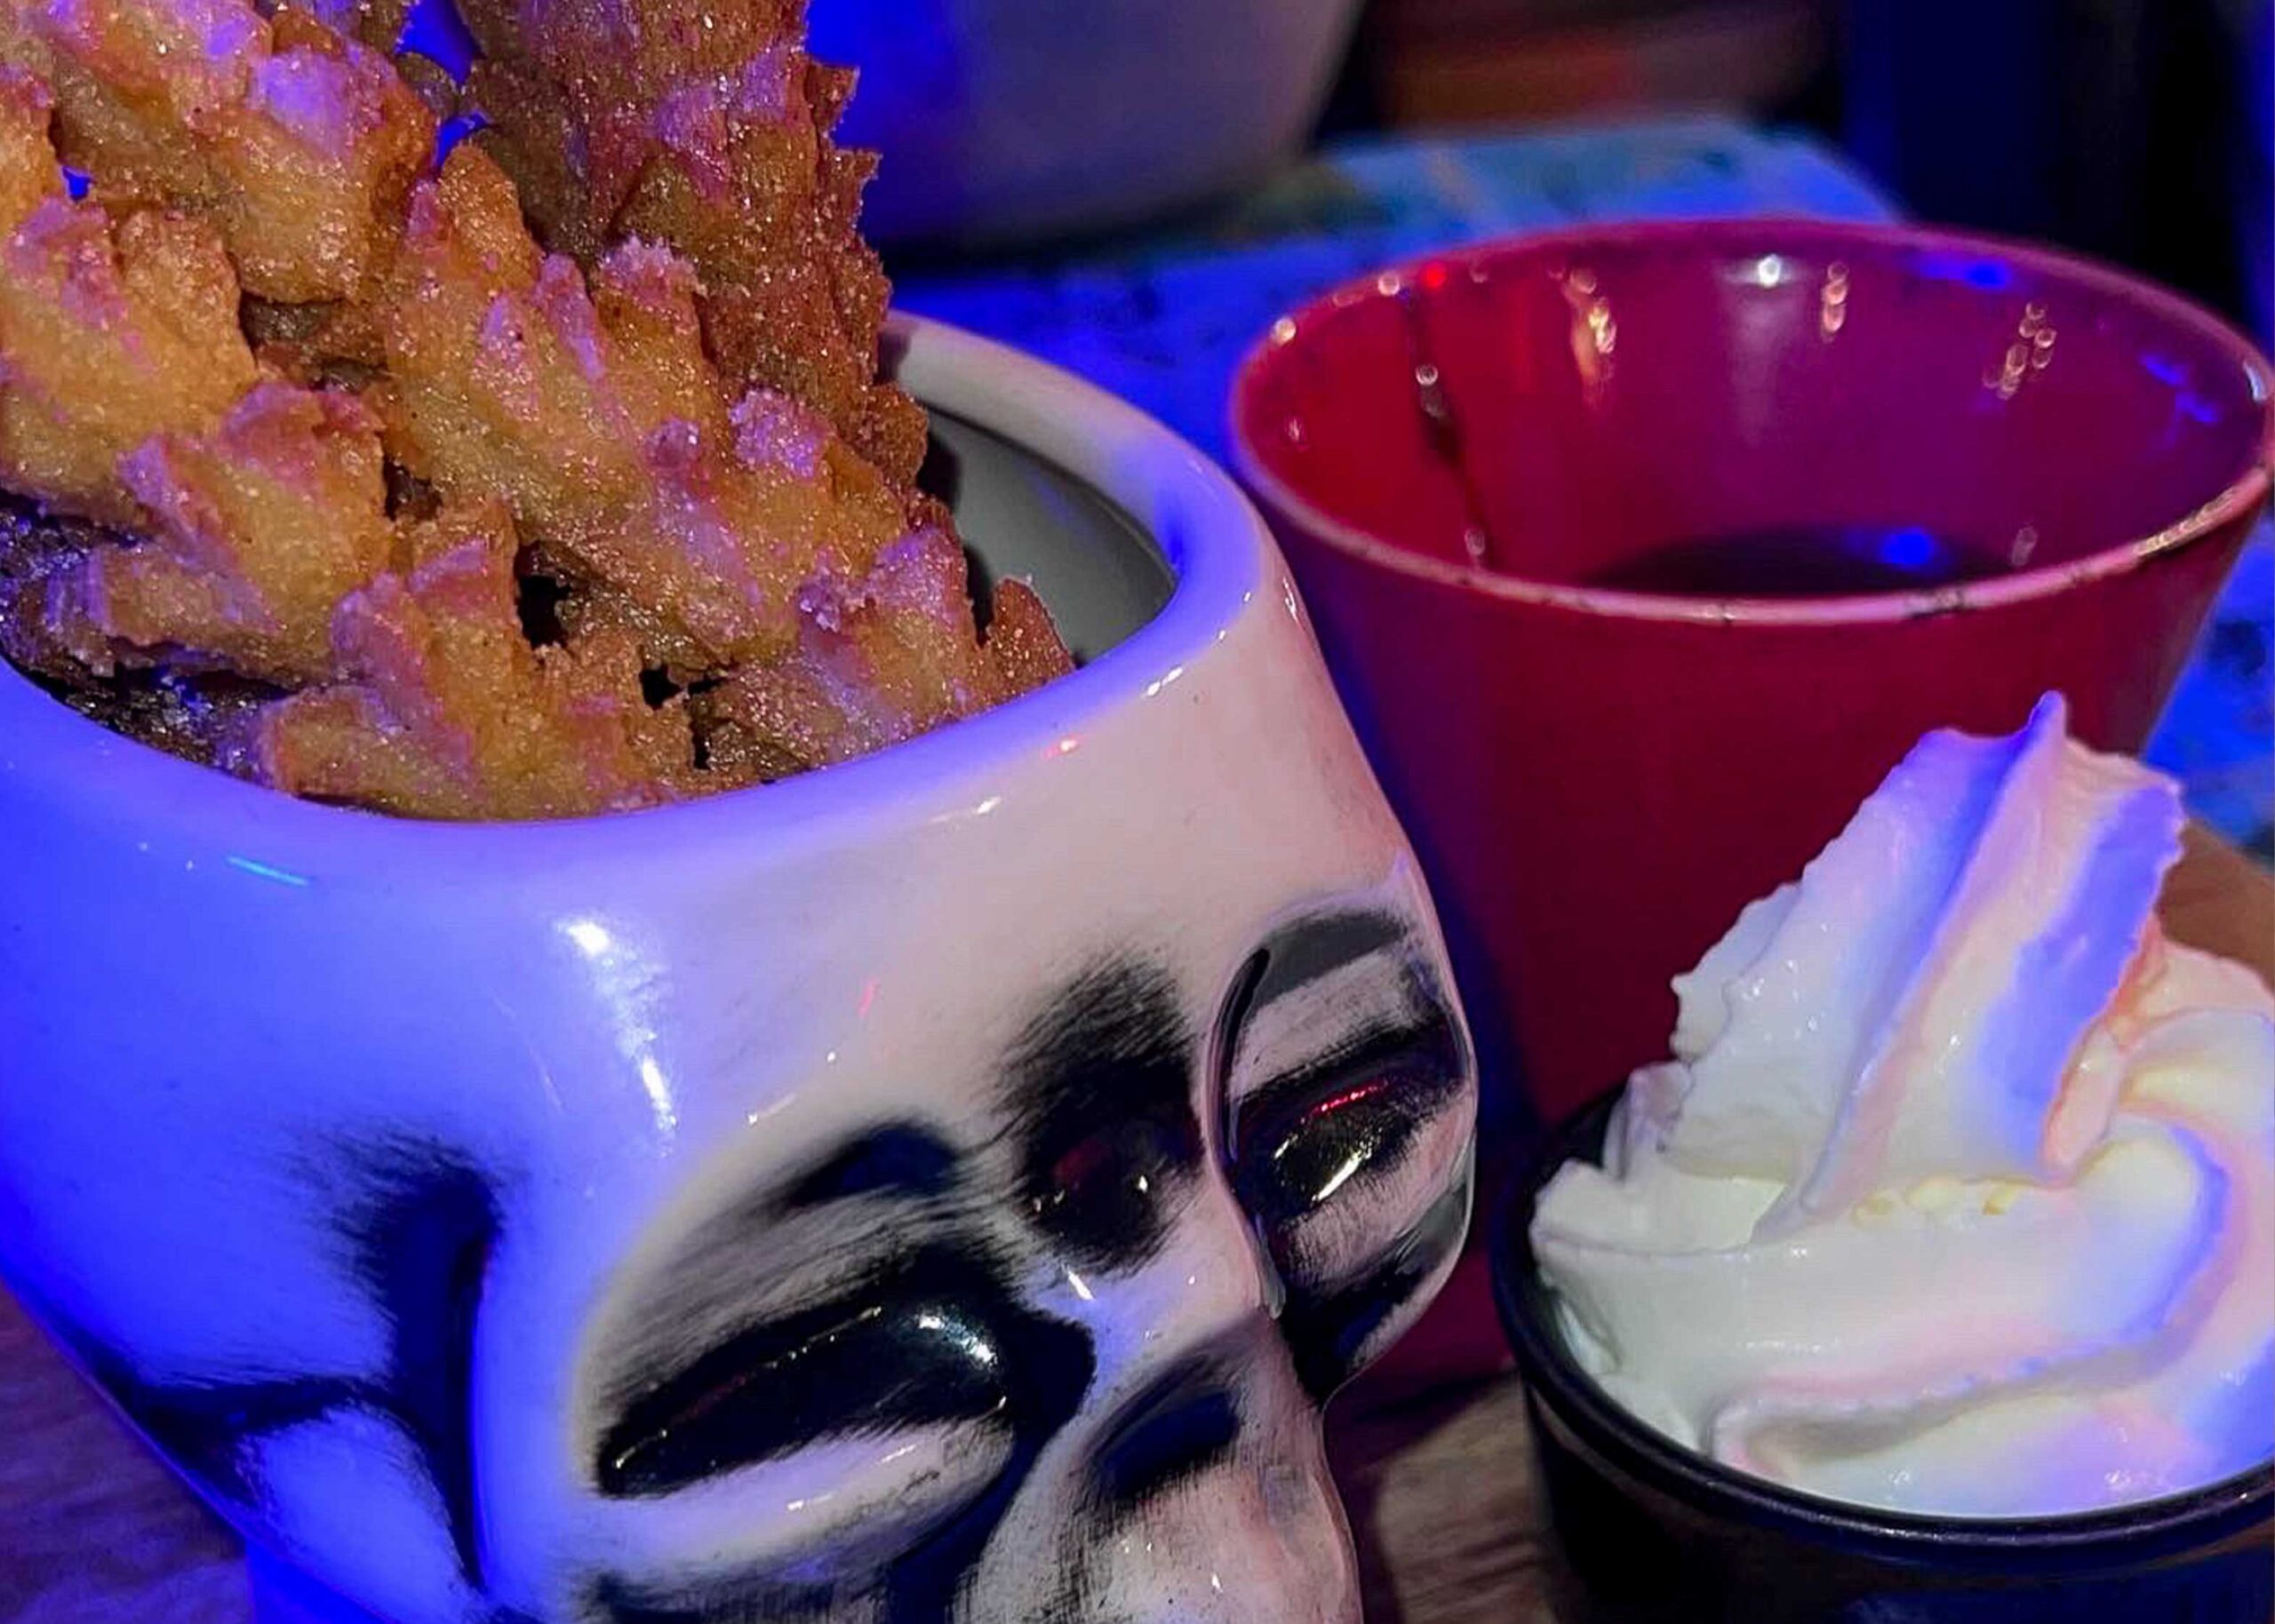 Skull jar filled with churros with a top of whipped cream beside it